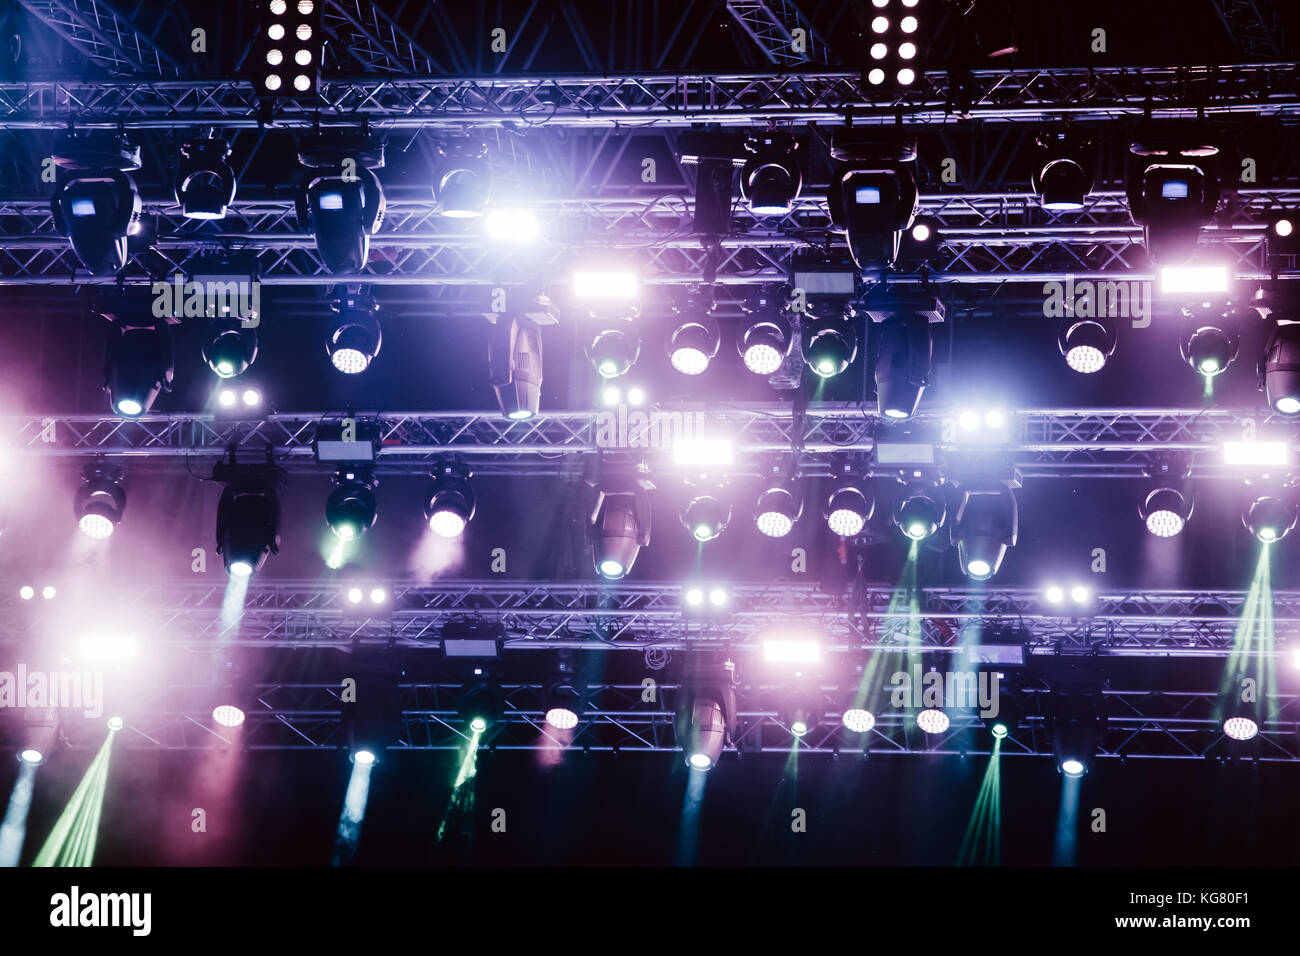 Picture of bright concert lighting on stage Stock Photo